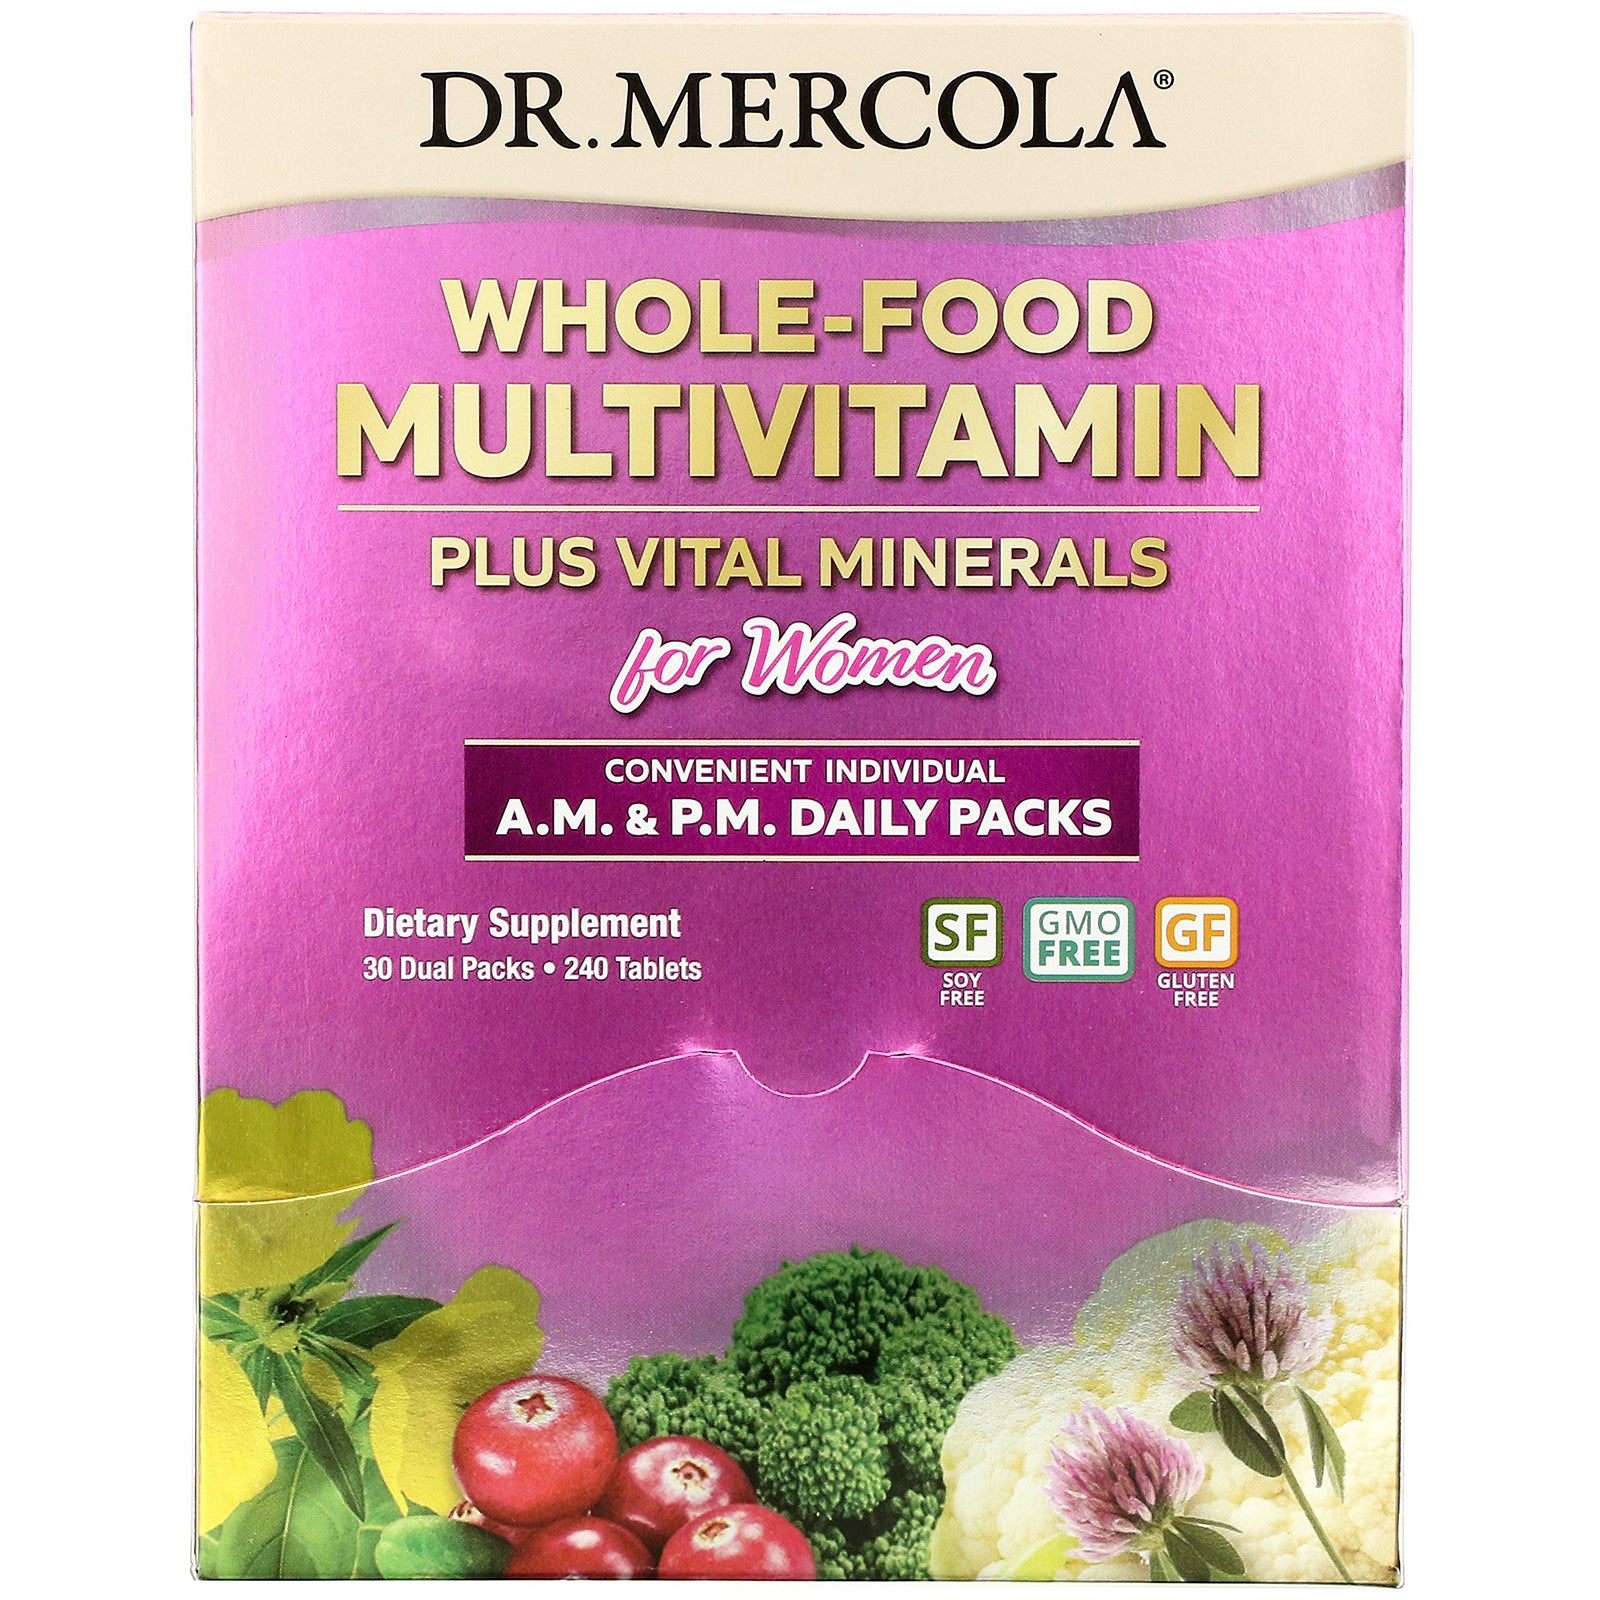 Dr. Mercola, Whole-Food Multivitamin Plus Vital Minerals for Women, A.M. & P.M. Daily Packs